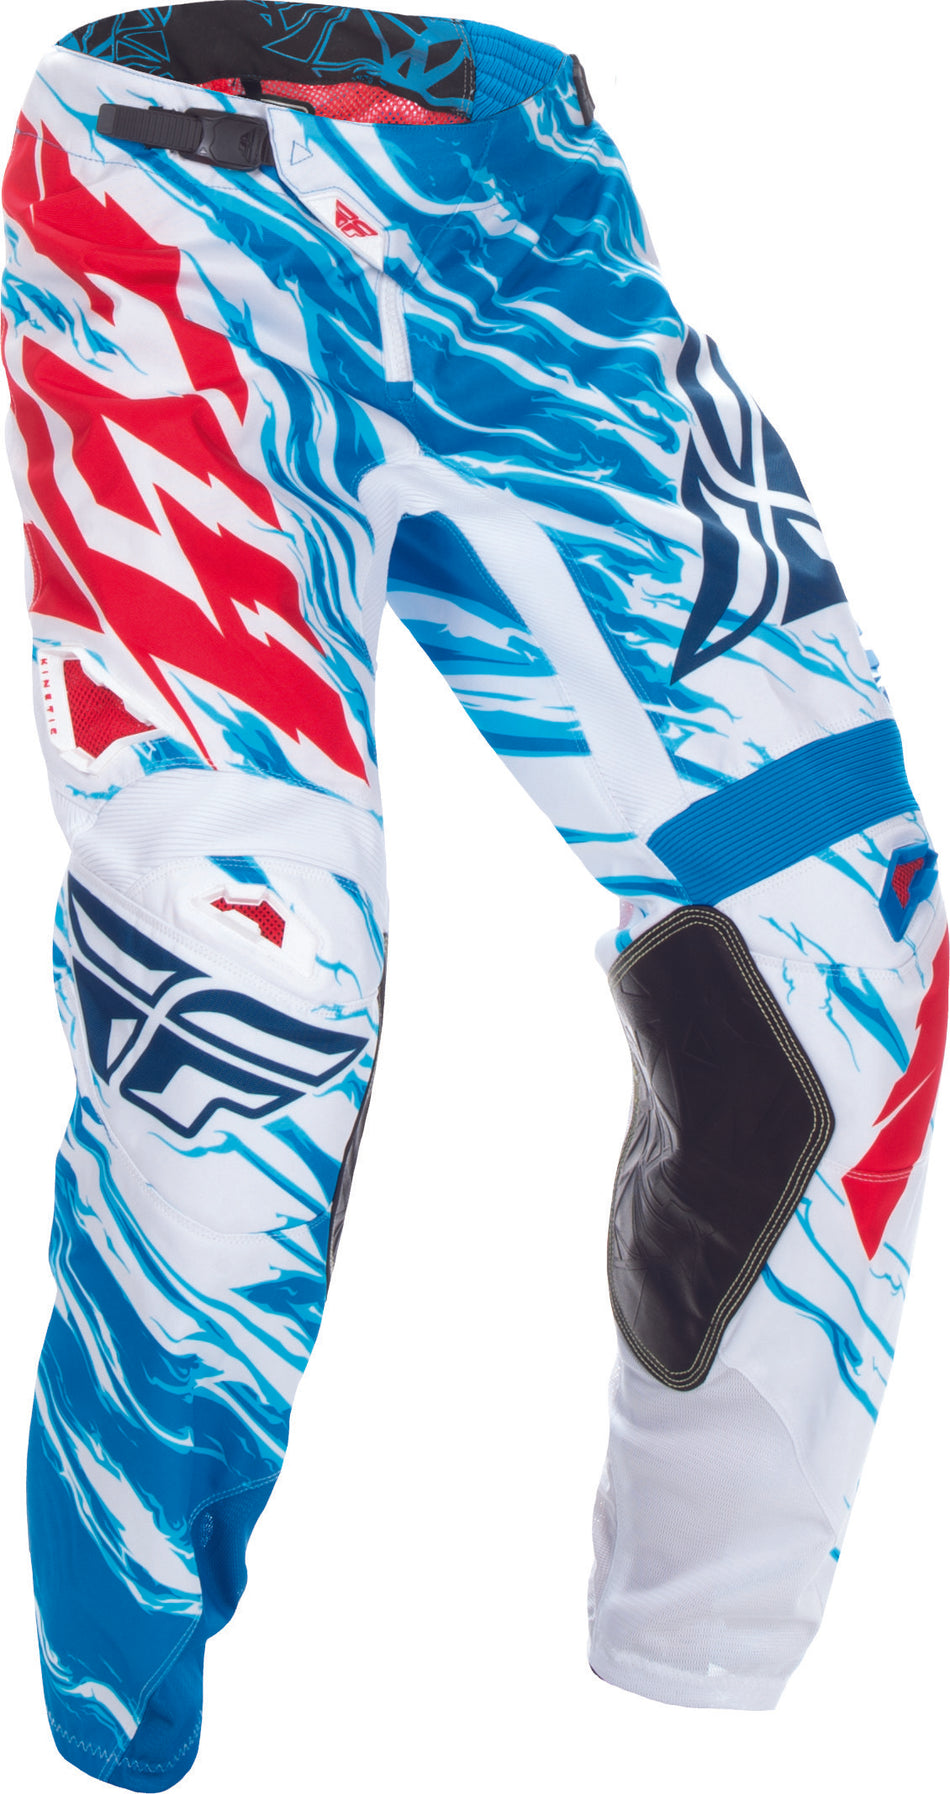 FLY RACING Kinetic Relapse Pant Red/White/Blue Sz 40 370-43240